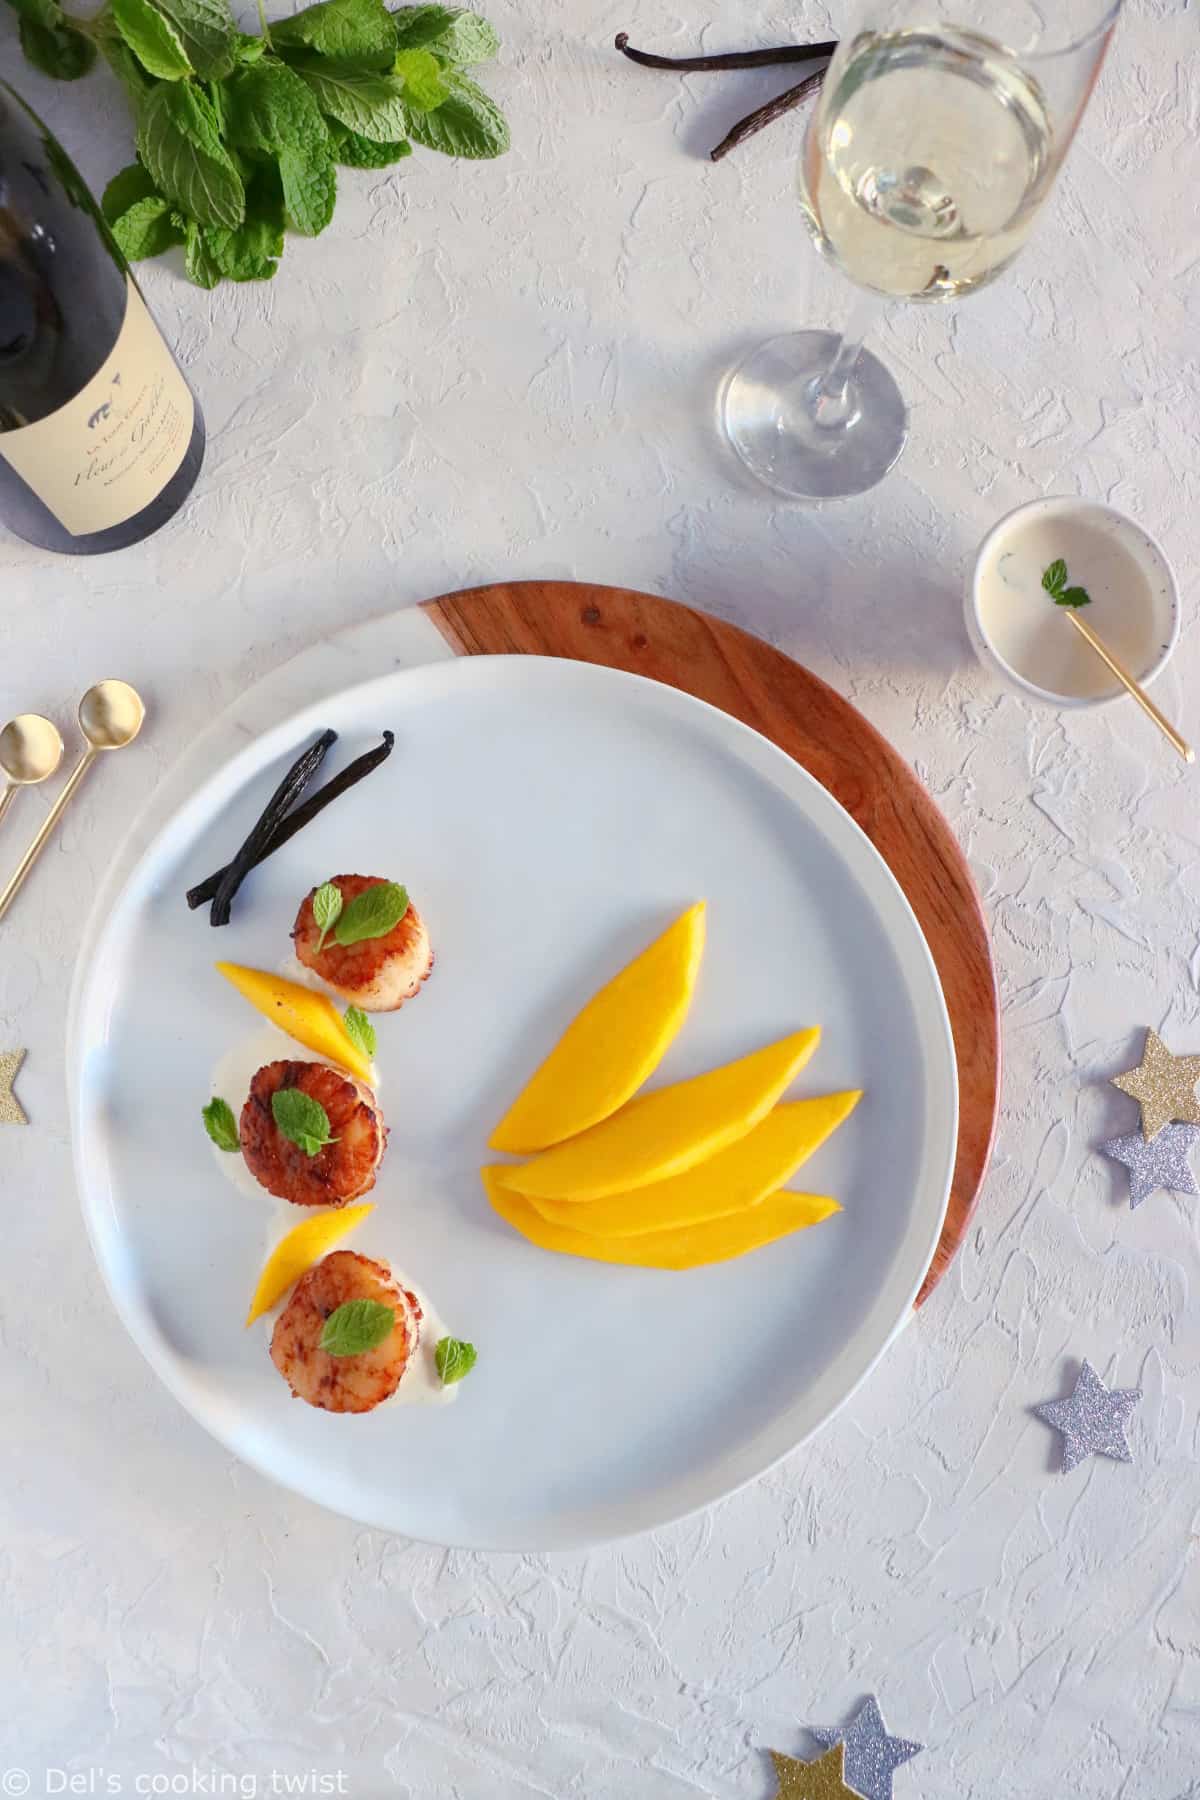 Add an exotic touch to your seafood with these elegant seared scallops with vanilla sauce and fresh mango.